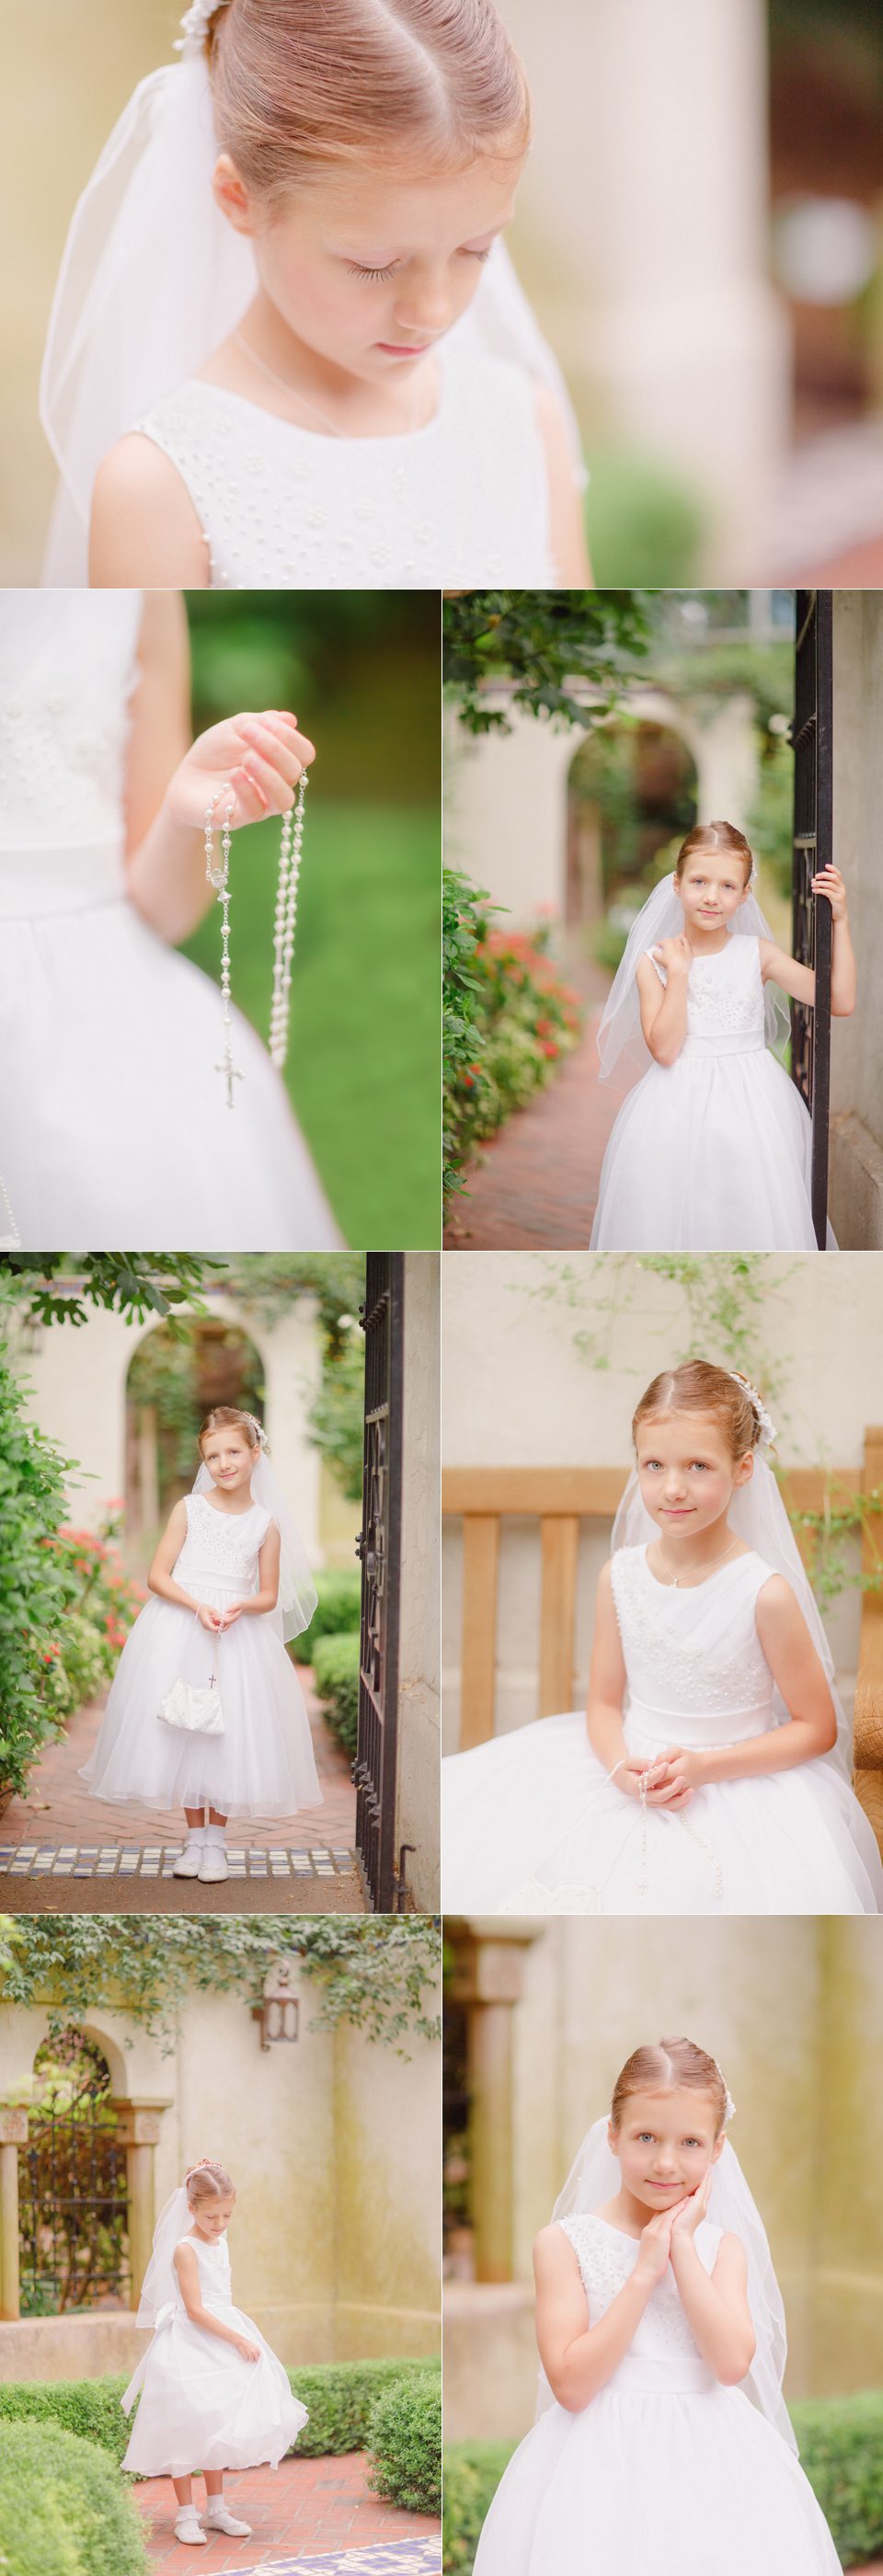 Professional children's photography in St. Louis for a little girl's christening.